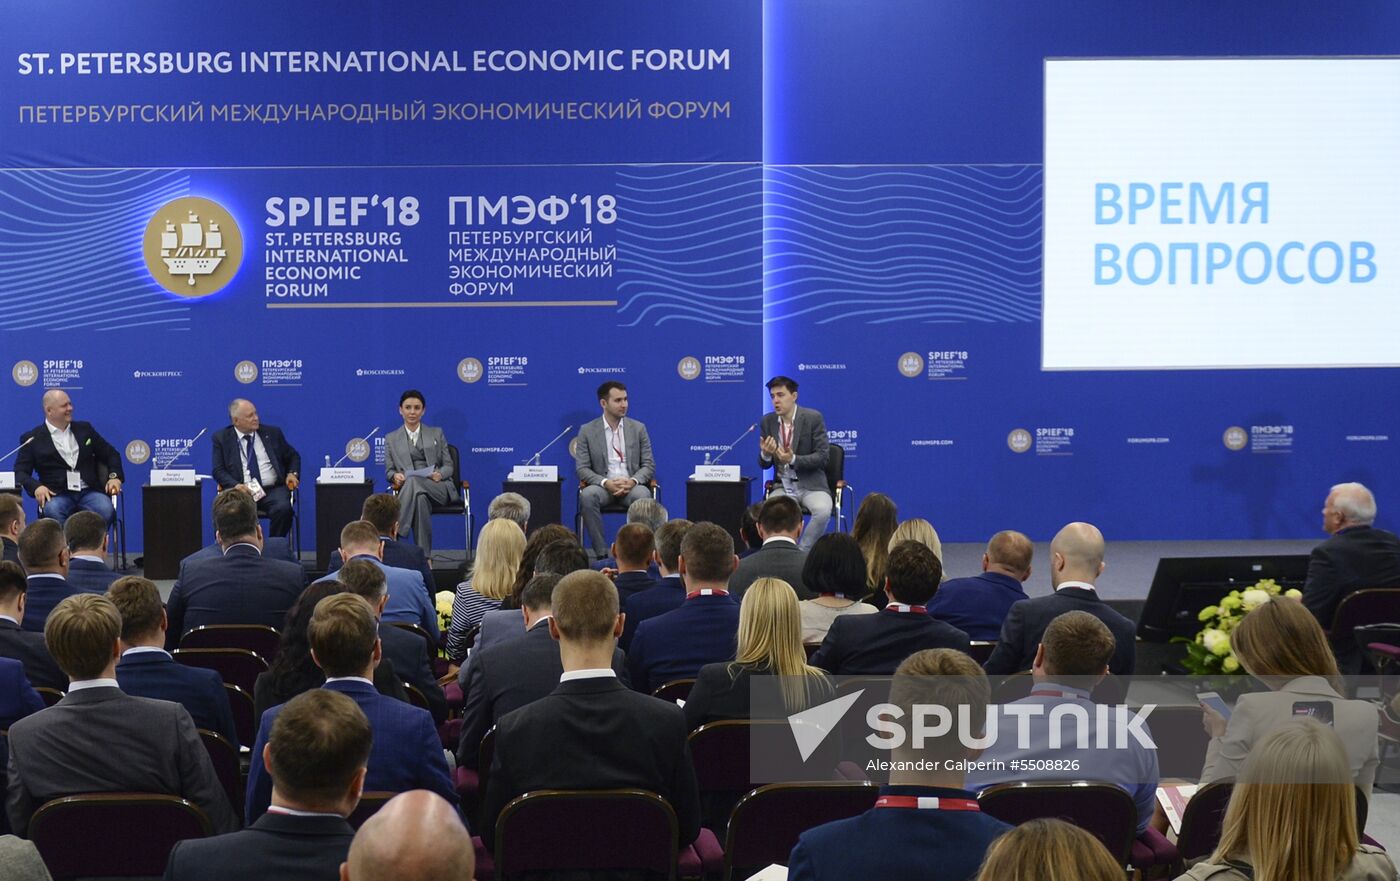 SPIEF 2018 events